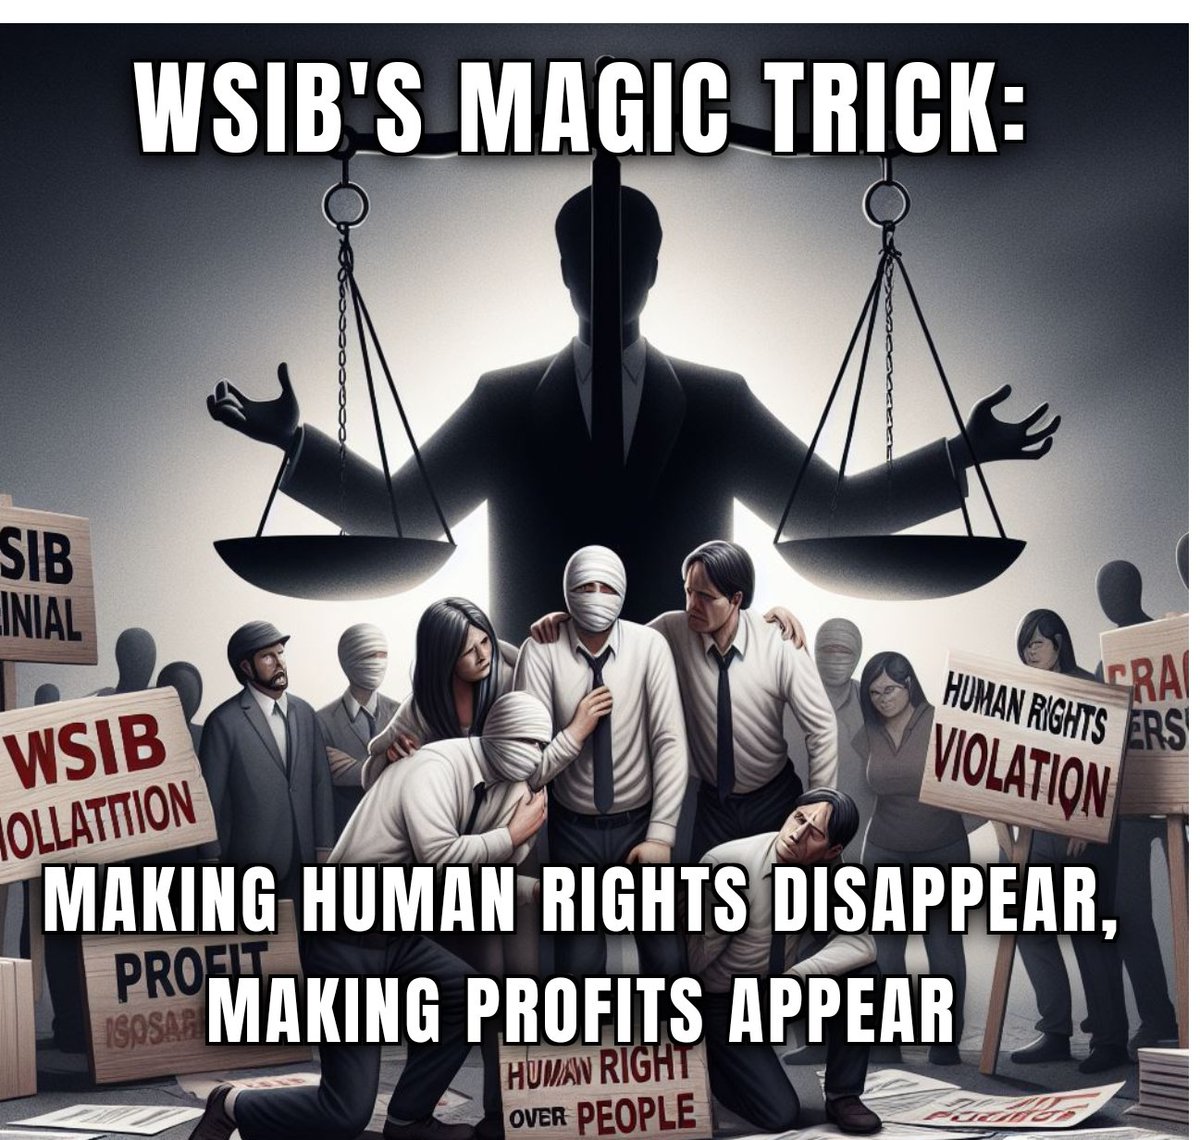 WSIB's magic trick: making human rights disappear, making profits appear. It's time to see through the illusion and demand justice for injured workers! #WorkersRights #InjuredWorkers #JusticeForAll